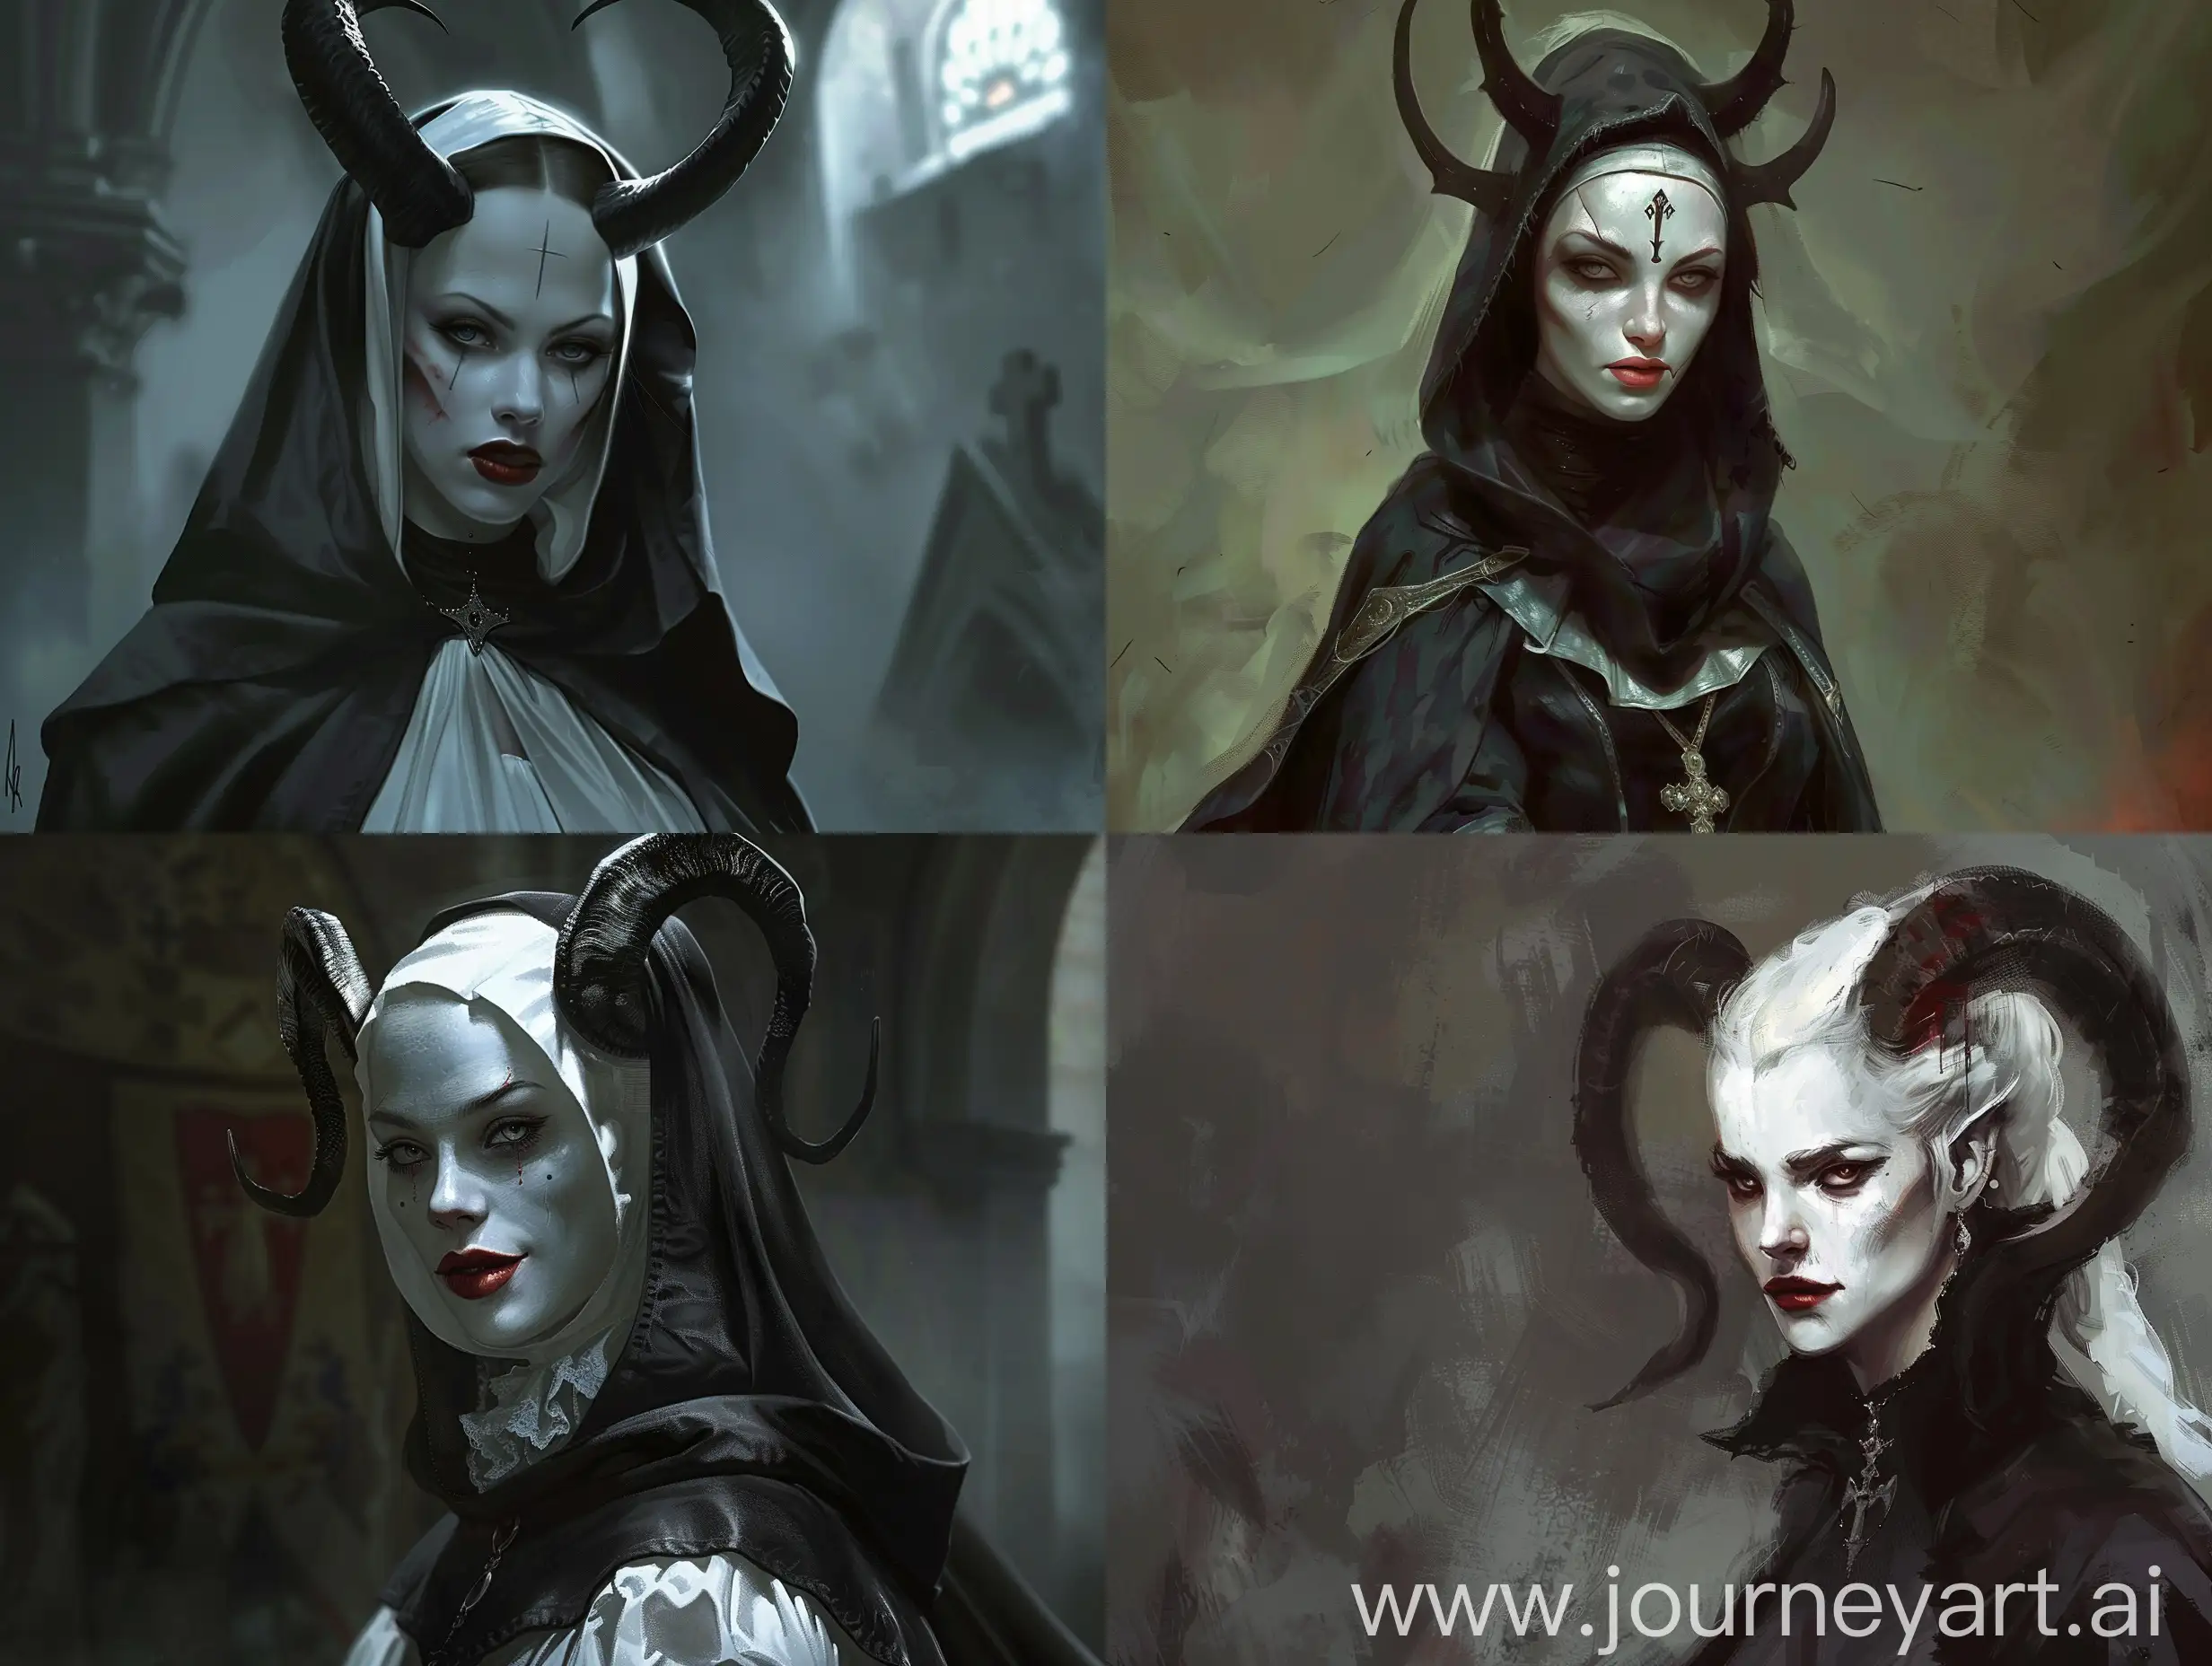 Sinister-SheDevil-Nun-with-Horns-in-Dungeons-Dragons-Style